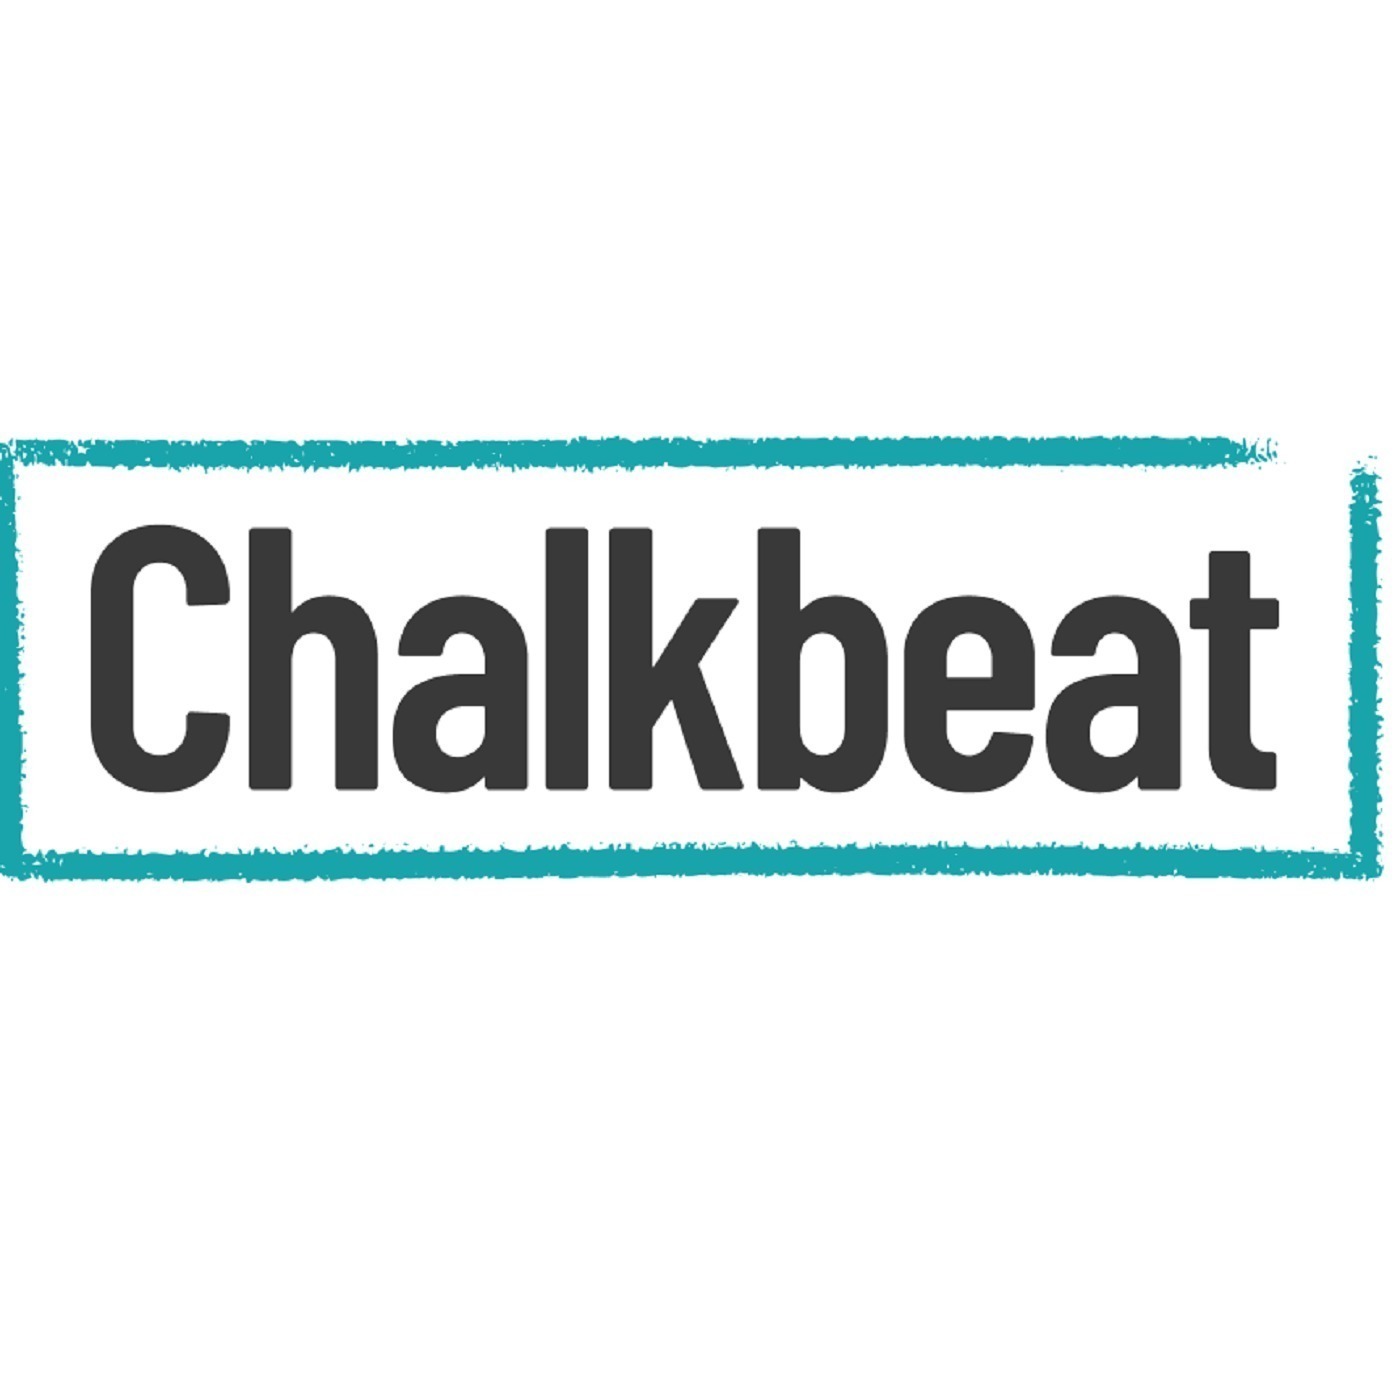 Bene Cipolla of Chalkbeat on Covering the Classroom